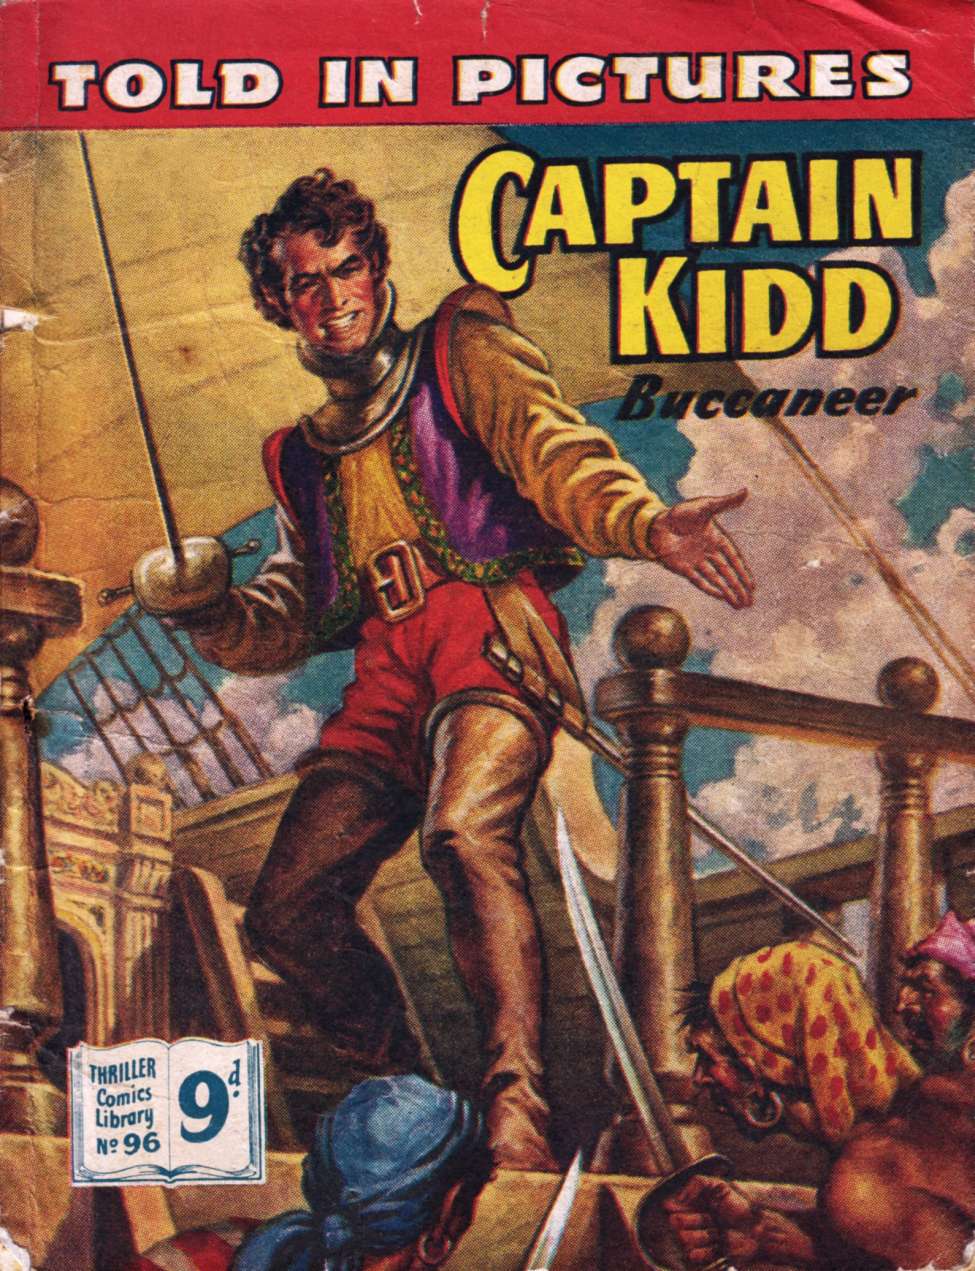 Book Cover For Thriller Comics Library 96 - Captain Kidd Buccaneer